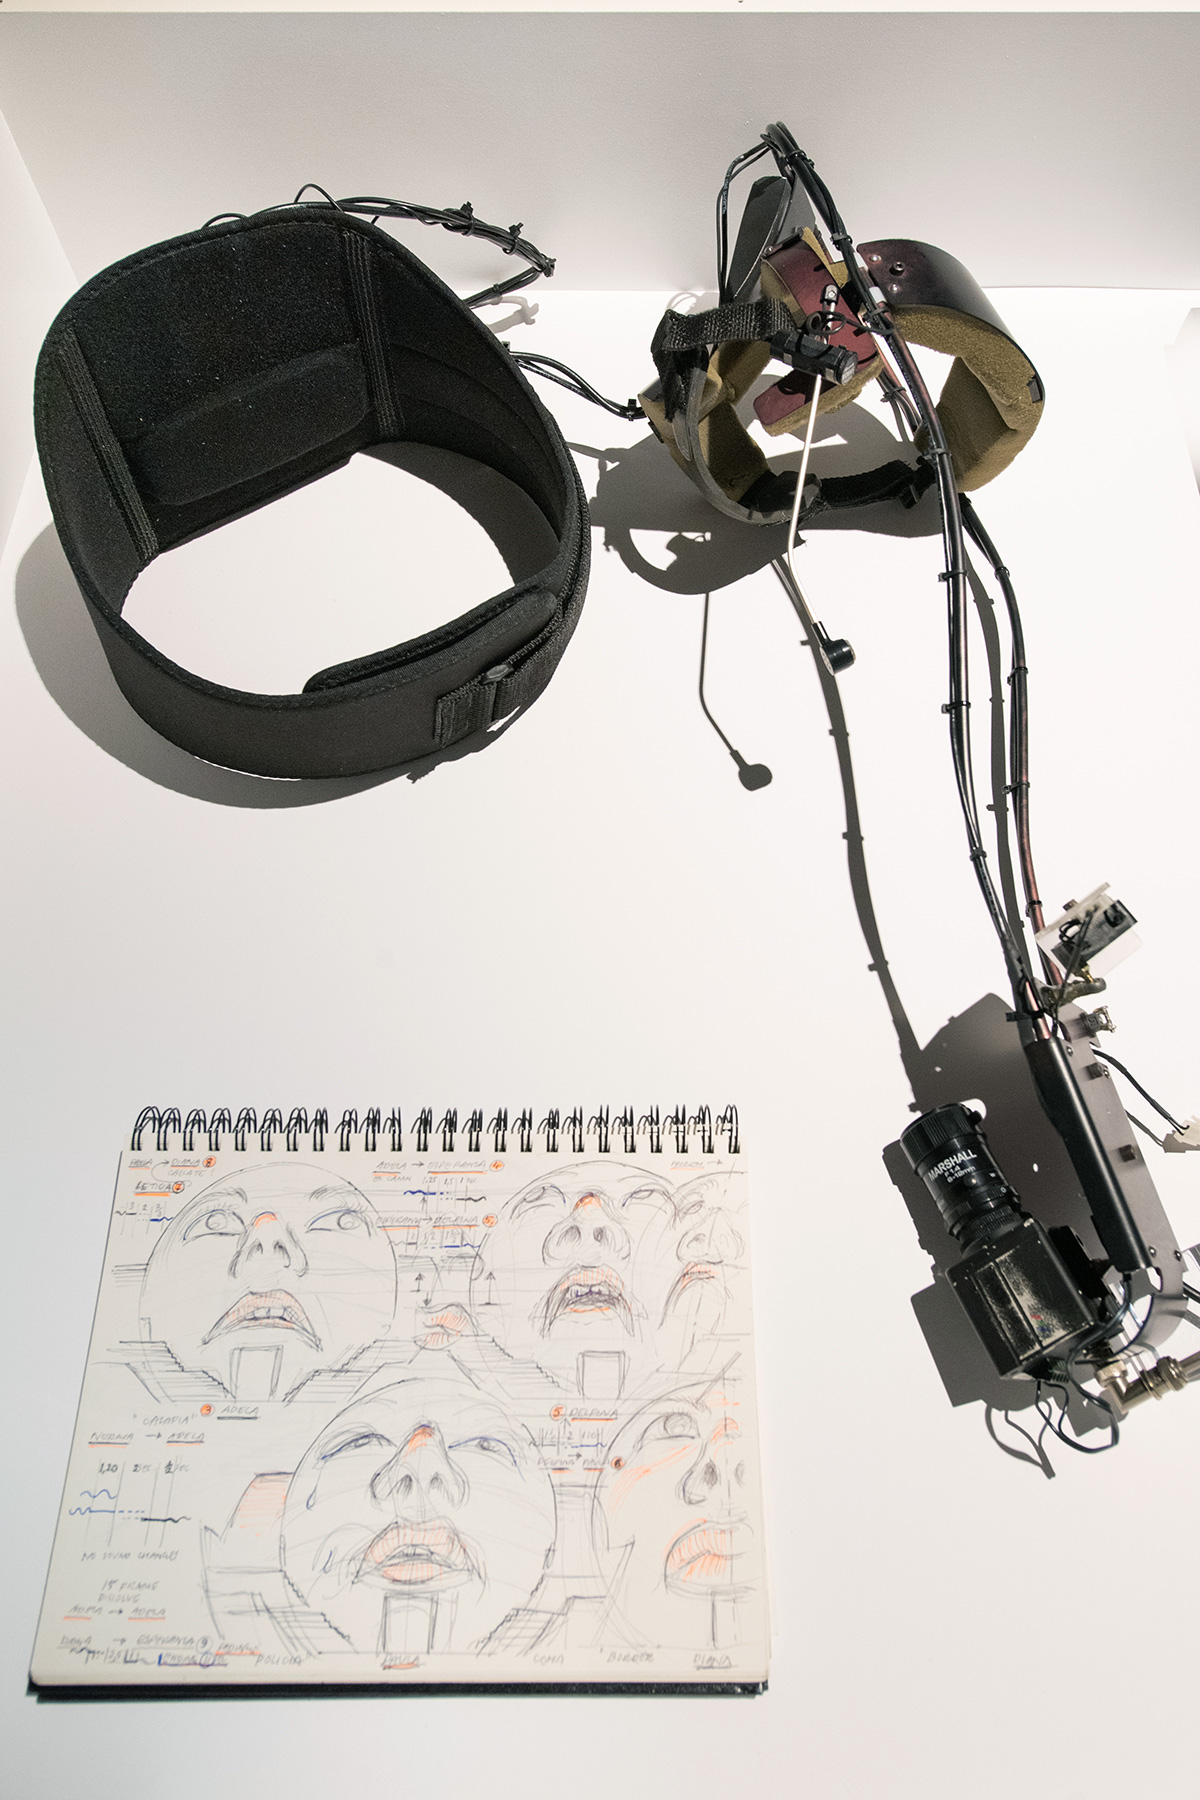 An apparatus made of metal and wire with electronics and a camera attached that is made to wear over a person’s head, and a sketchbook open to a page with pen and ink drawings of faces showing different expressions.